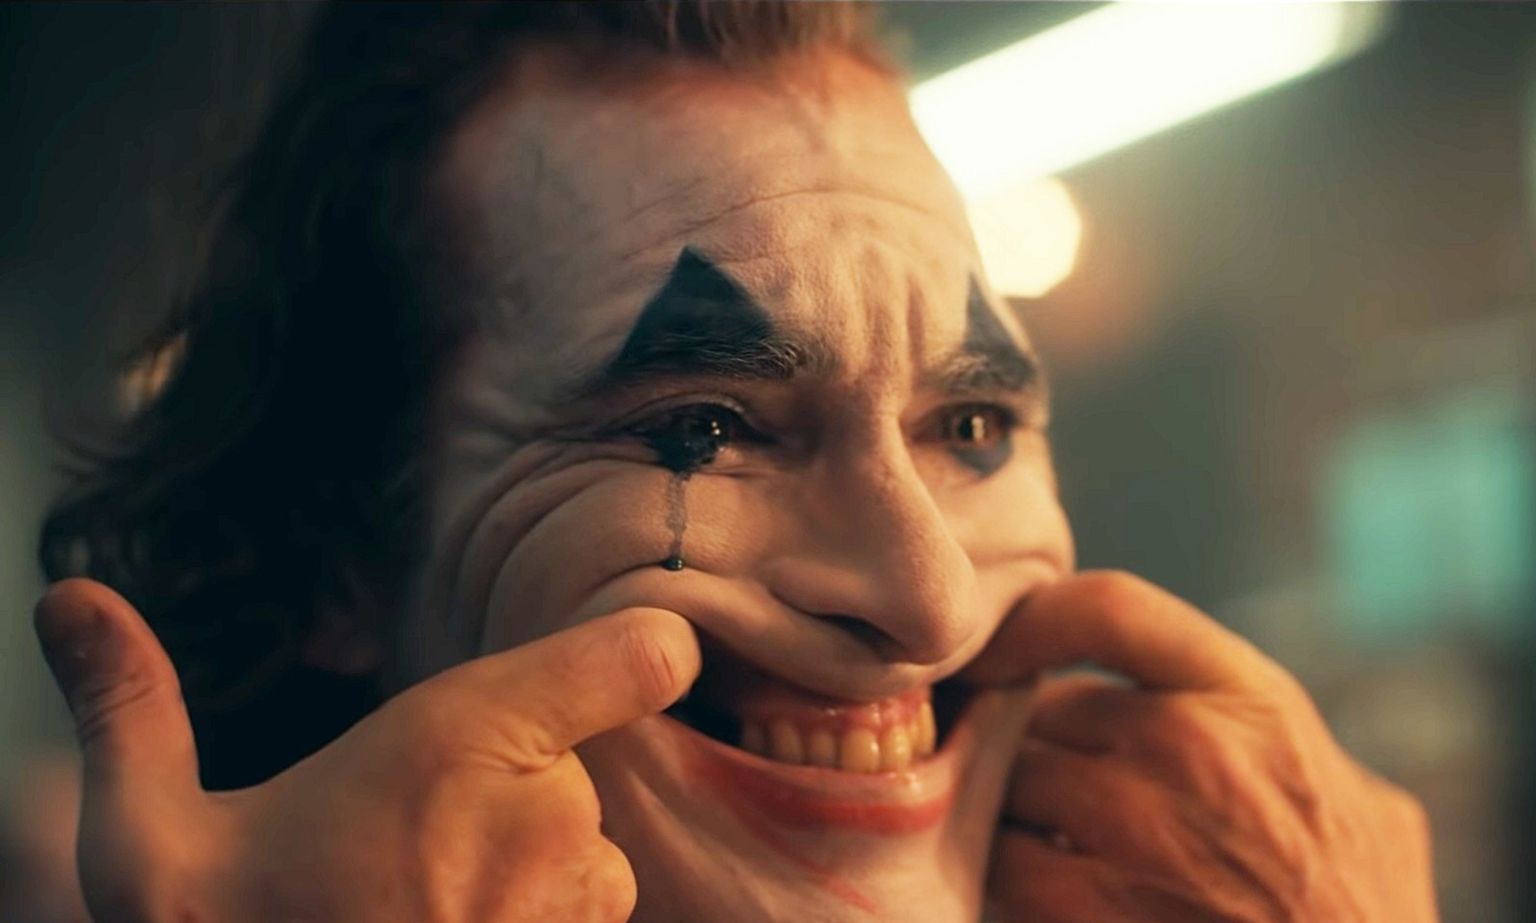 Is the Joker from Batman actually queer? Here are some intriguing fan theories